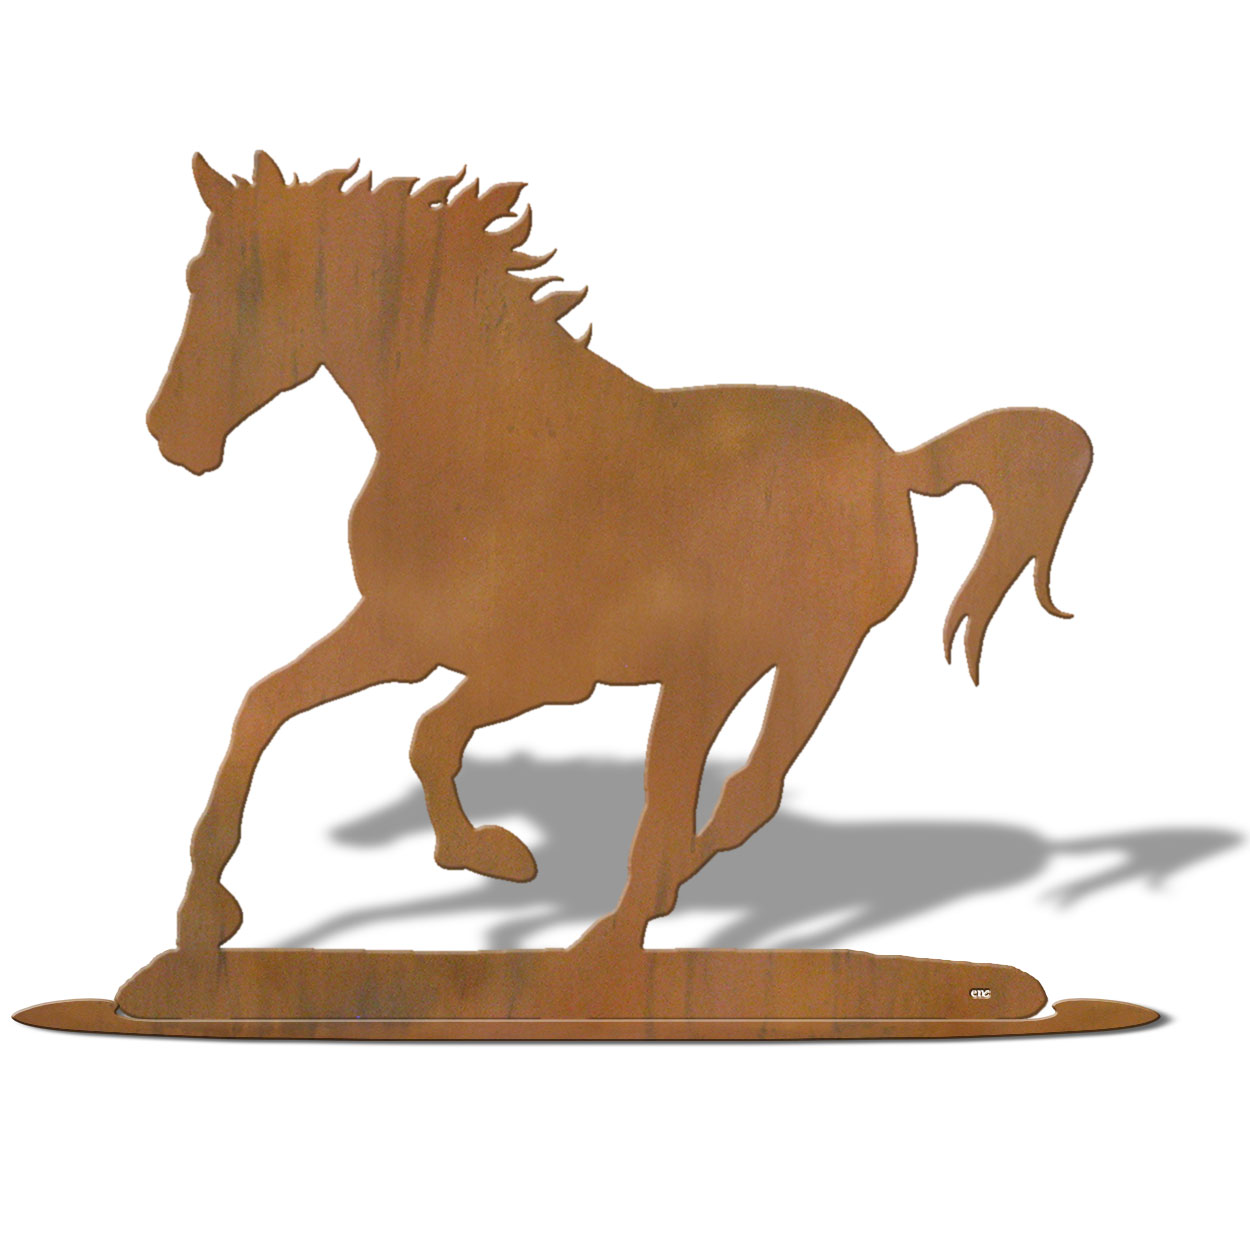 623037r - Tabletop Art - 20in x 18in - Horse - Rust Patina